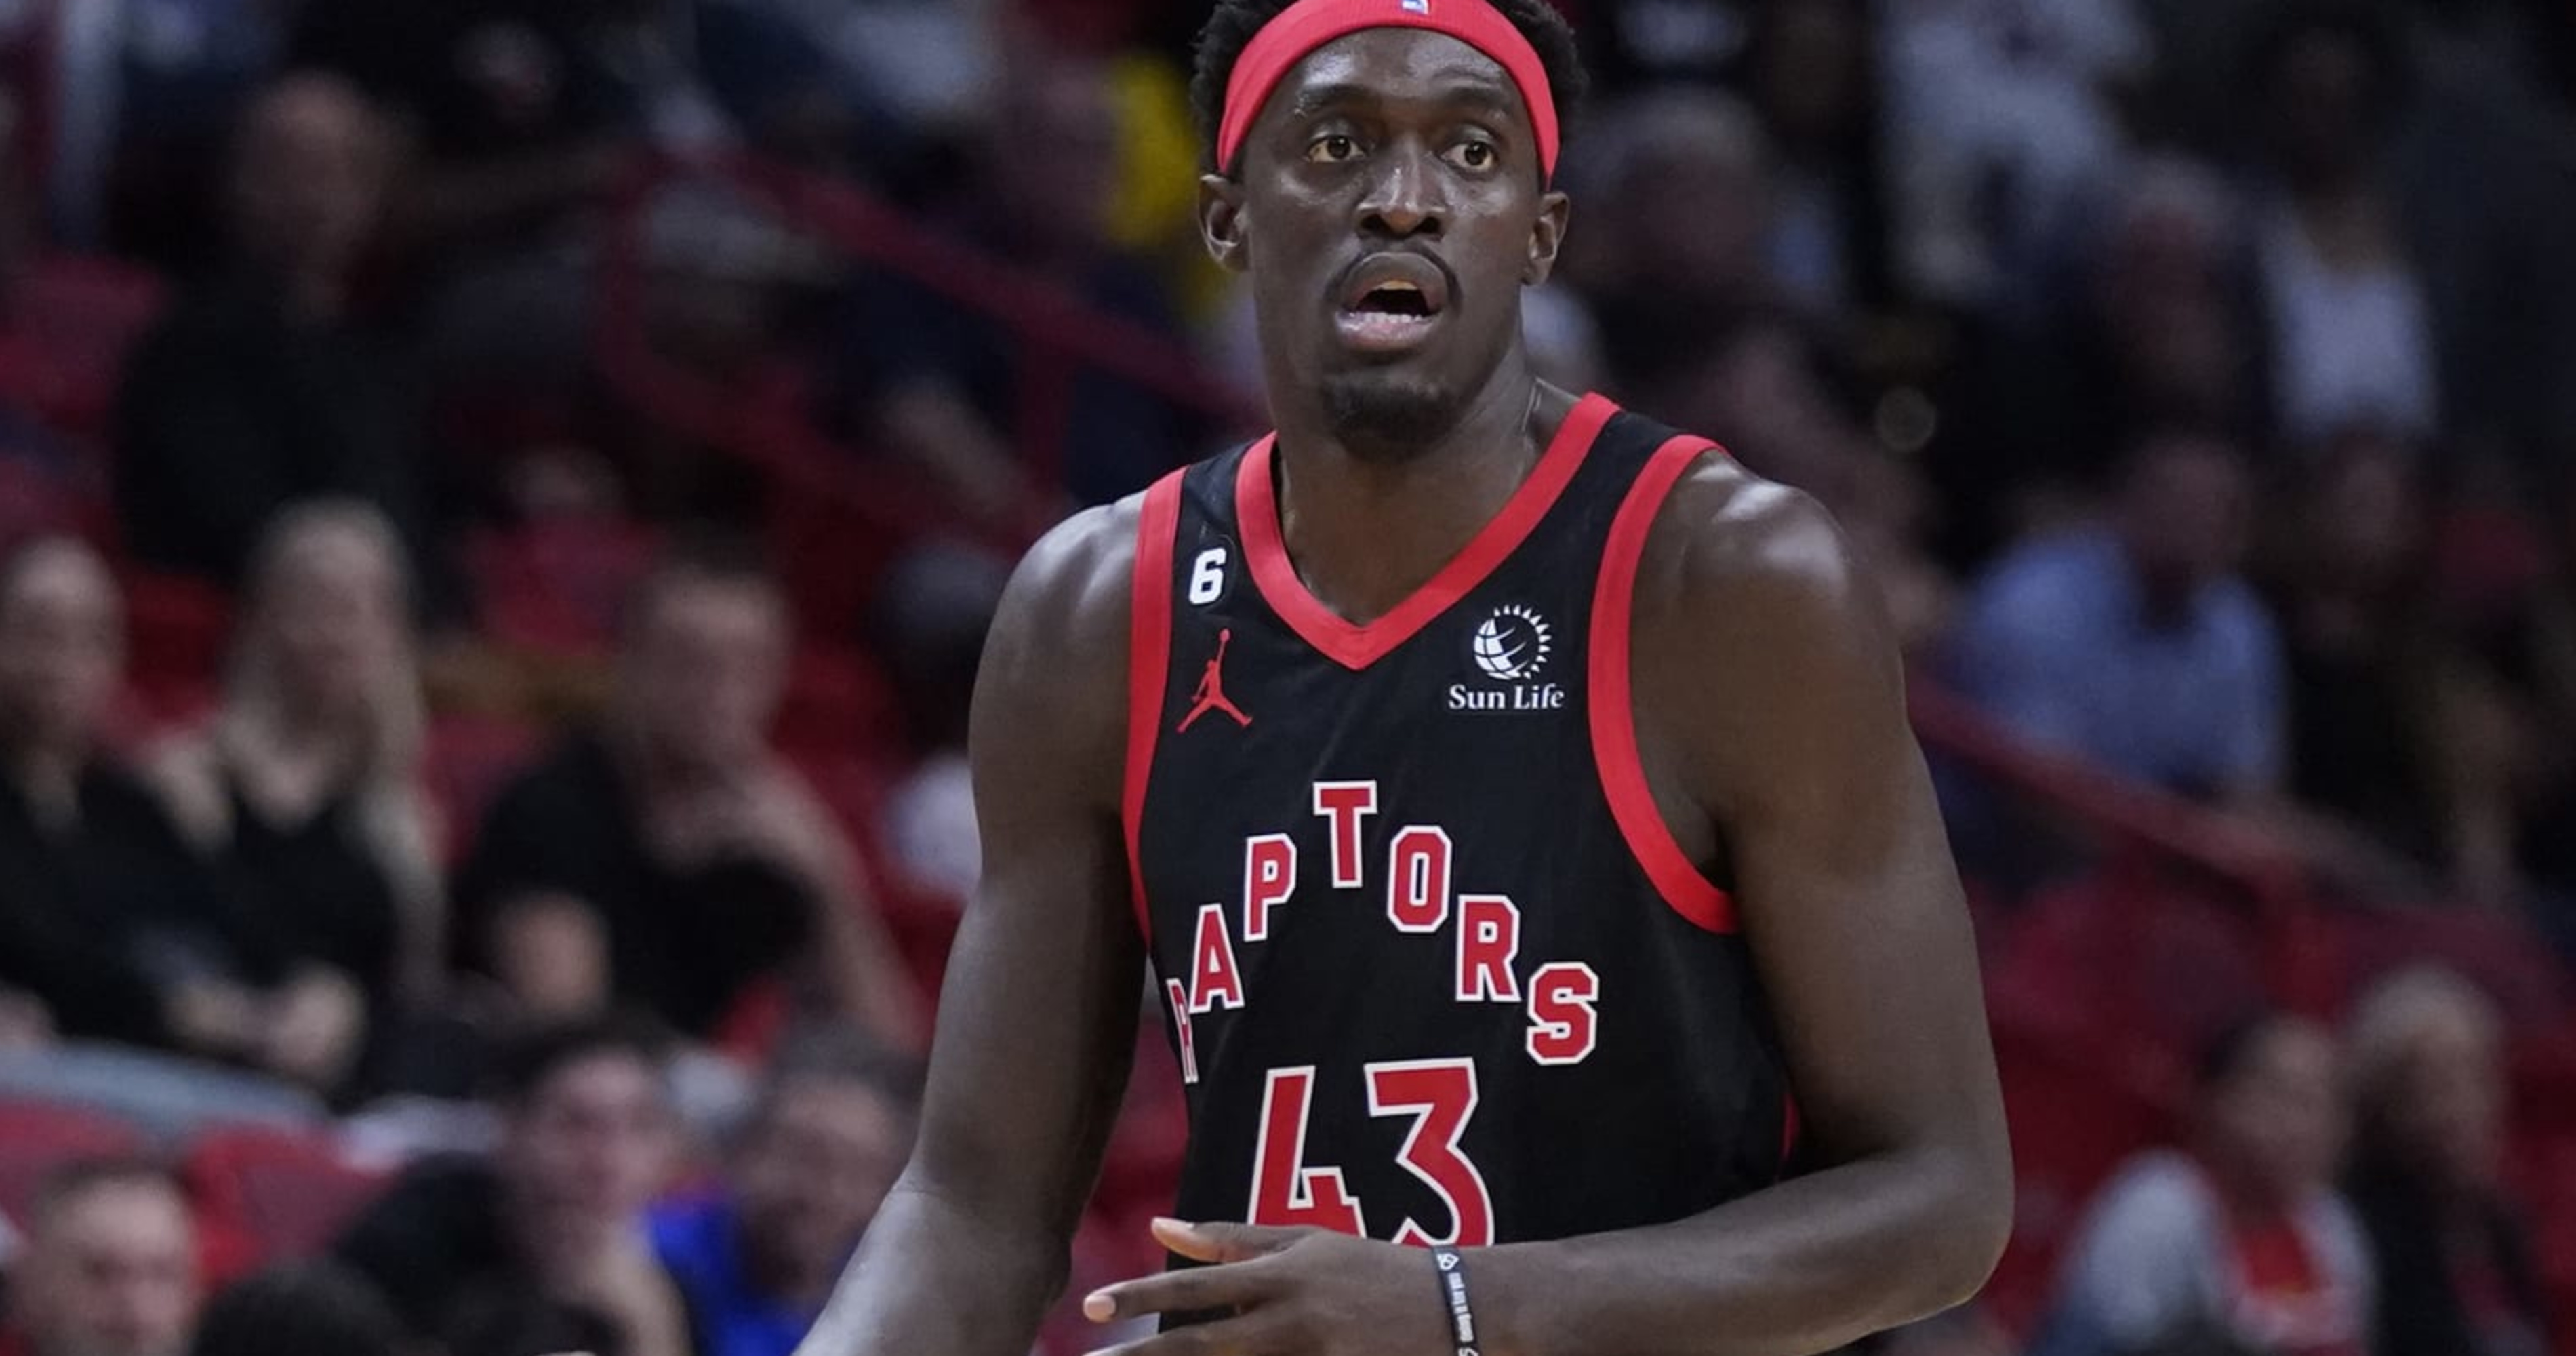 Fred VanVleet Leaving The Toronto Raptors Could Be Costly For Pascal Siakam